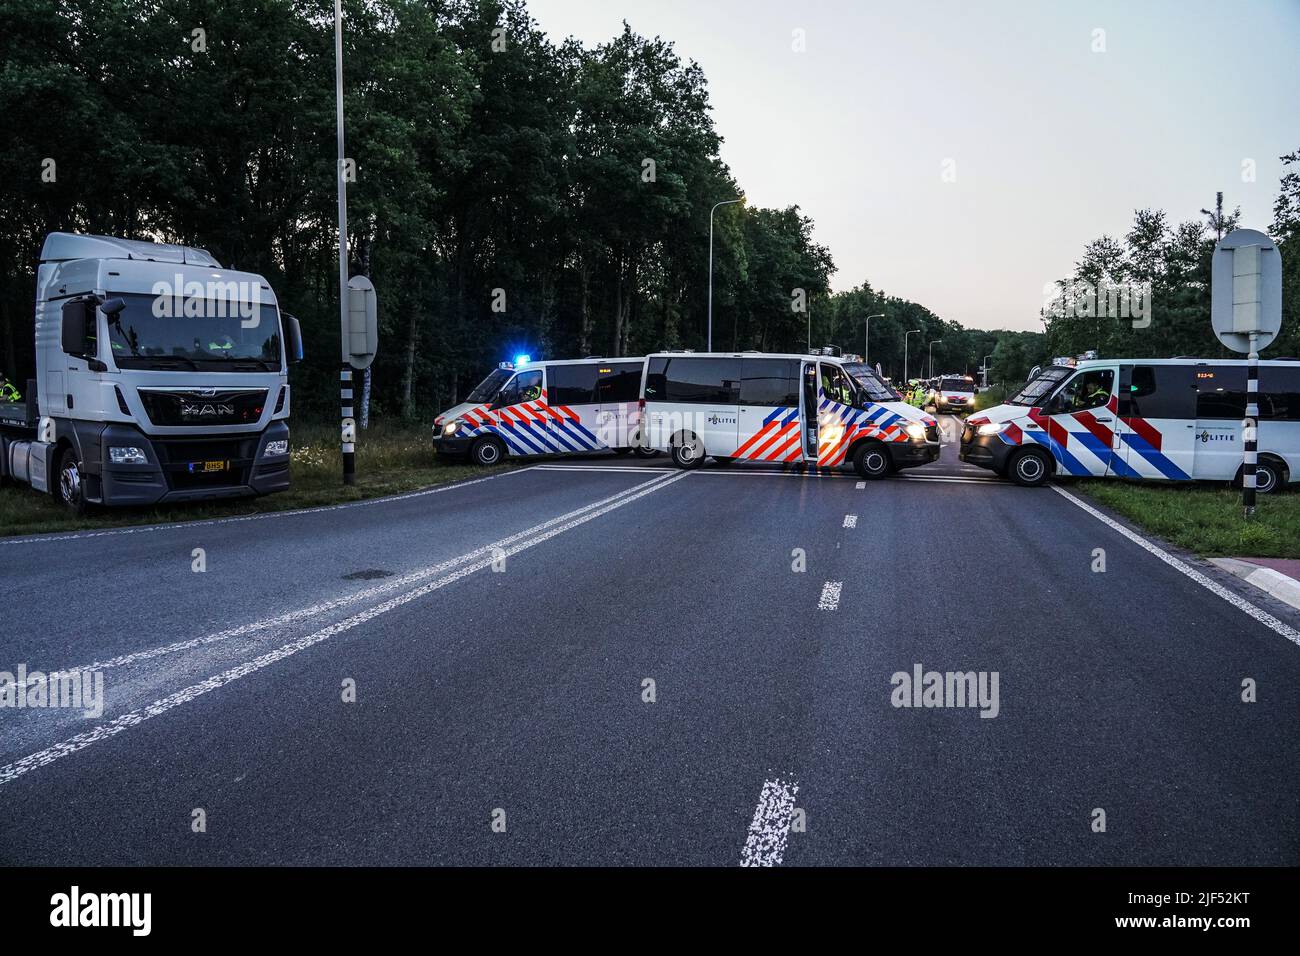 2022-06-29 22:08:05 APELDOORN - The police have closed the access to Apeldoorn from the A1 highway to stop demonstrating farmers who may be on their way. The farmers are said to be on their way to a police station where activists who were previously arrested are in jail. ANP JEROEN JUMELET netherlands out - belgium out Stock Photo